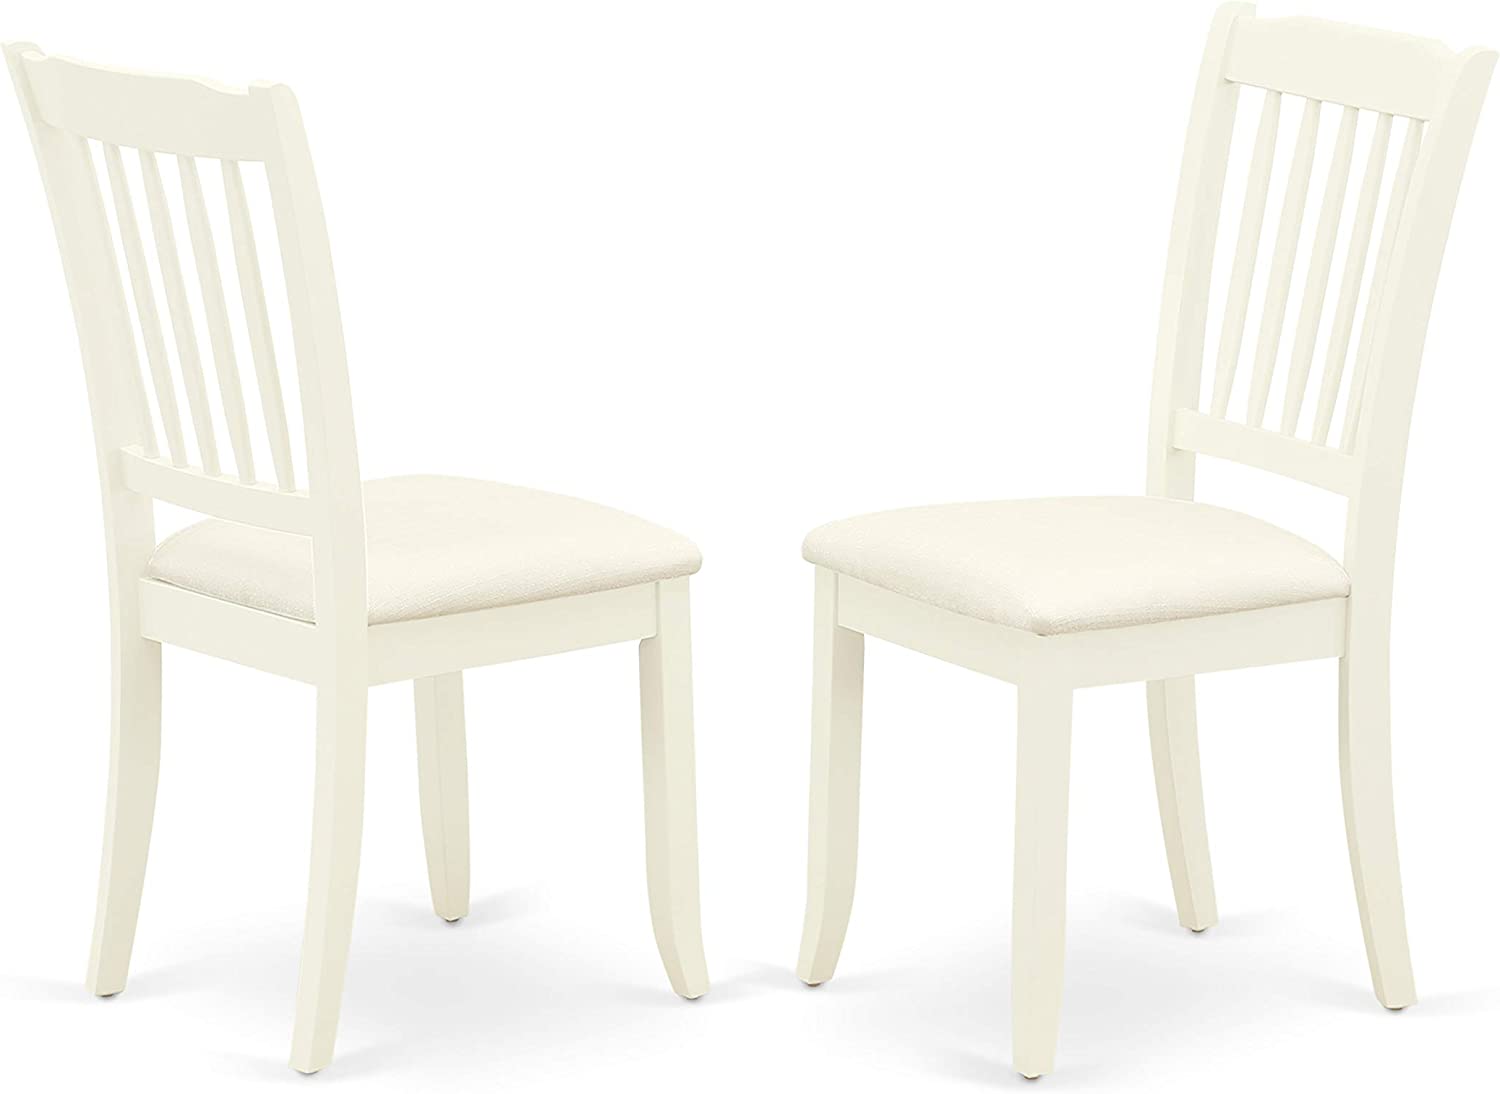 East West Furniture 5Pc Dining Set Includes a Round Dinette Table and Four Vertical Slatted Microfiber Seat Kitchen Chairs, Linen White Finish